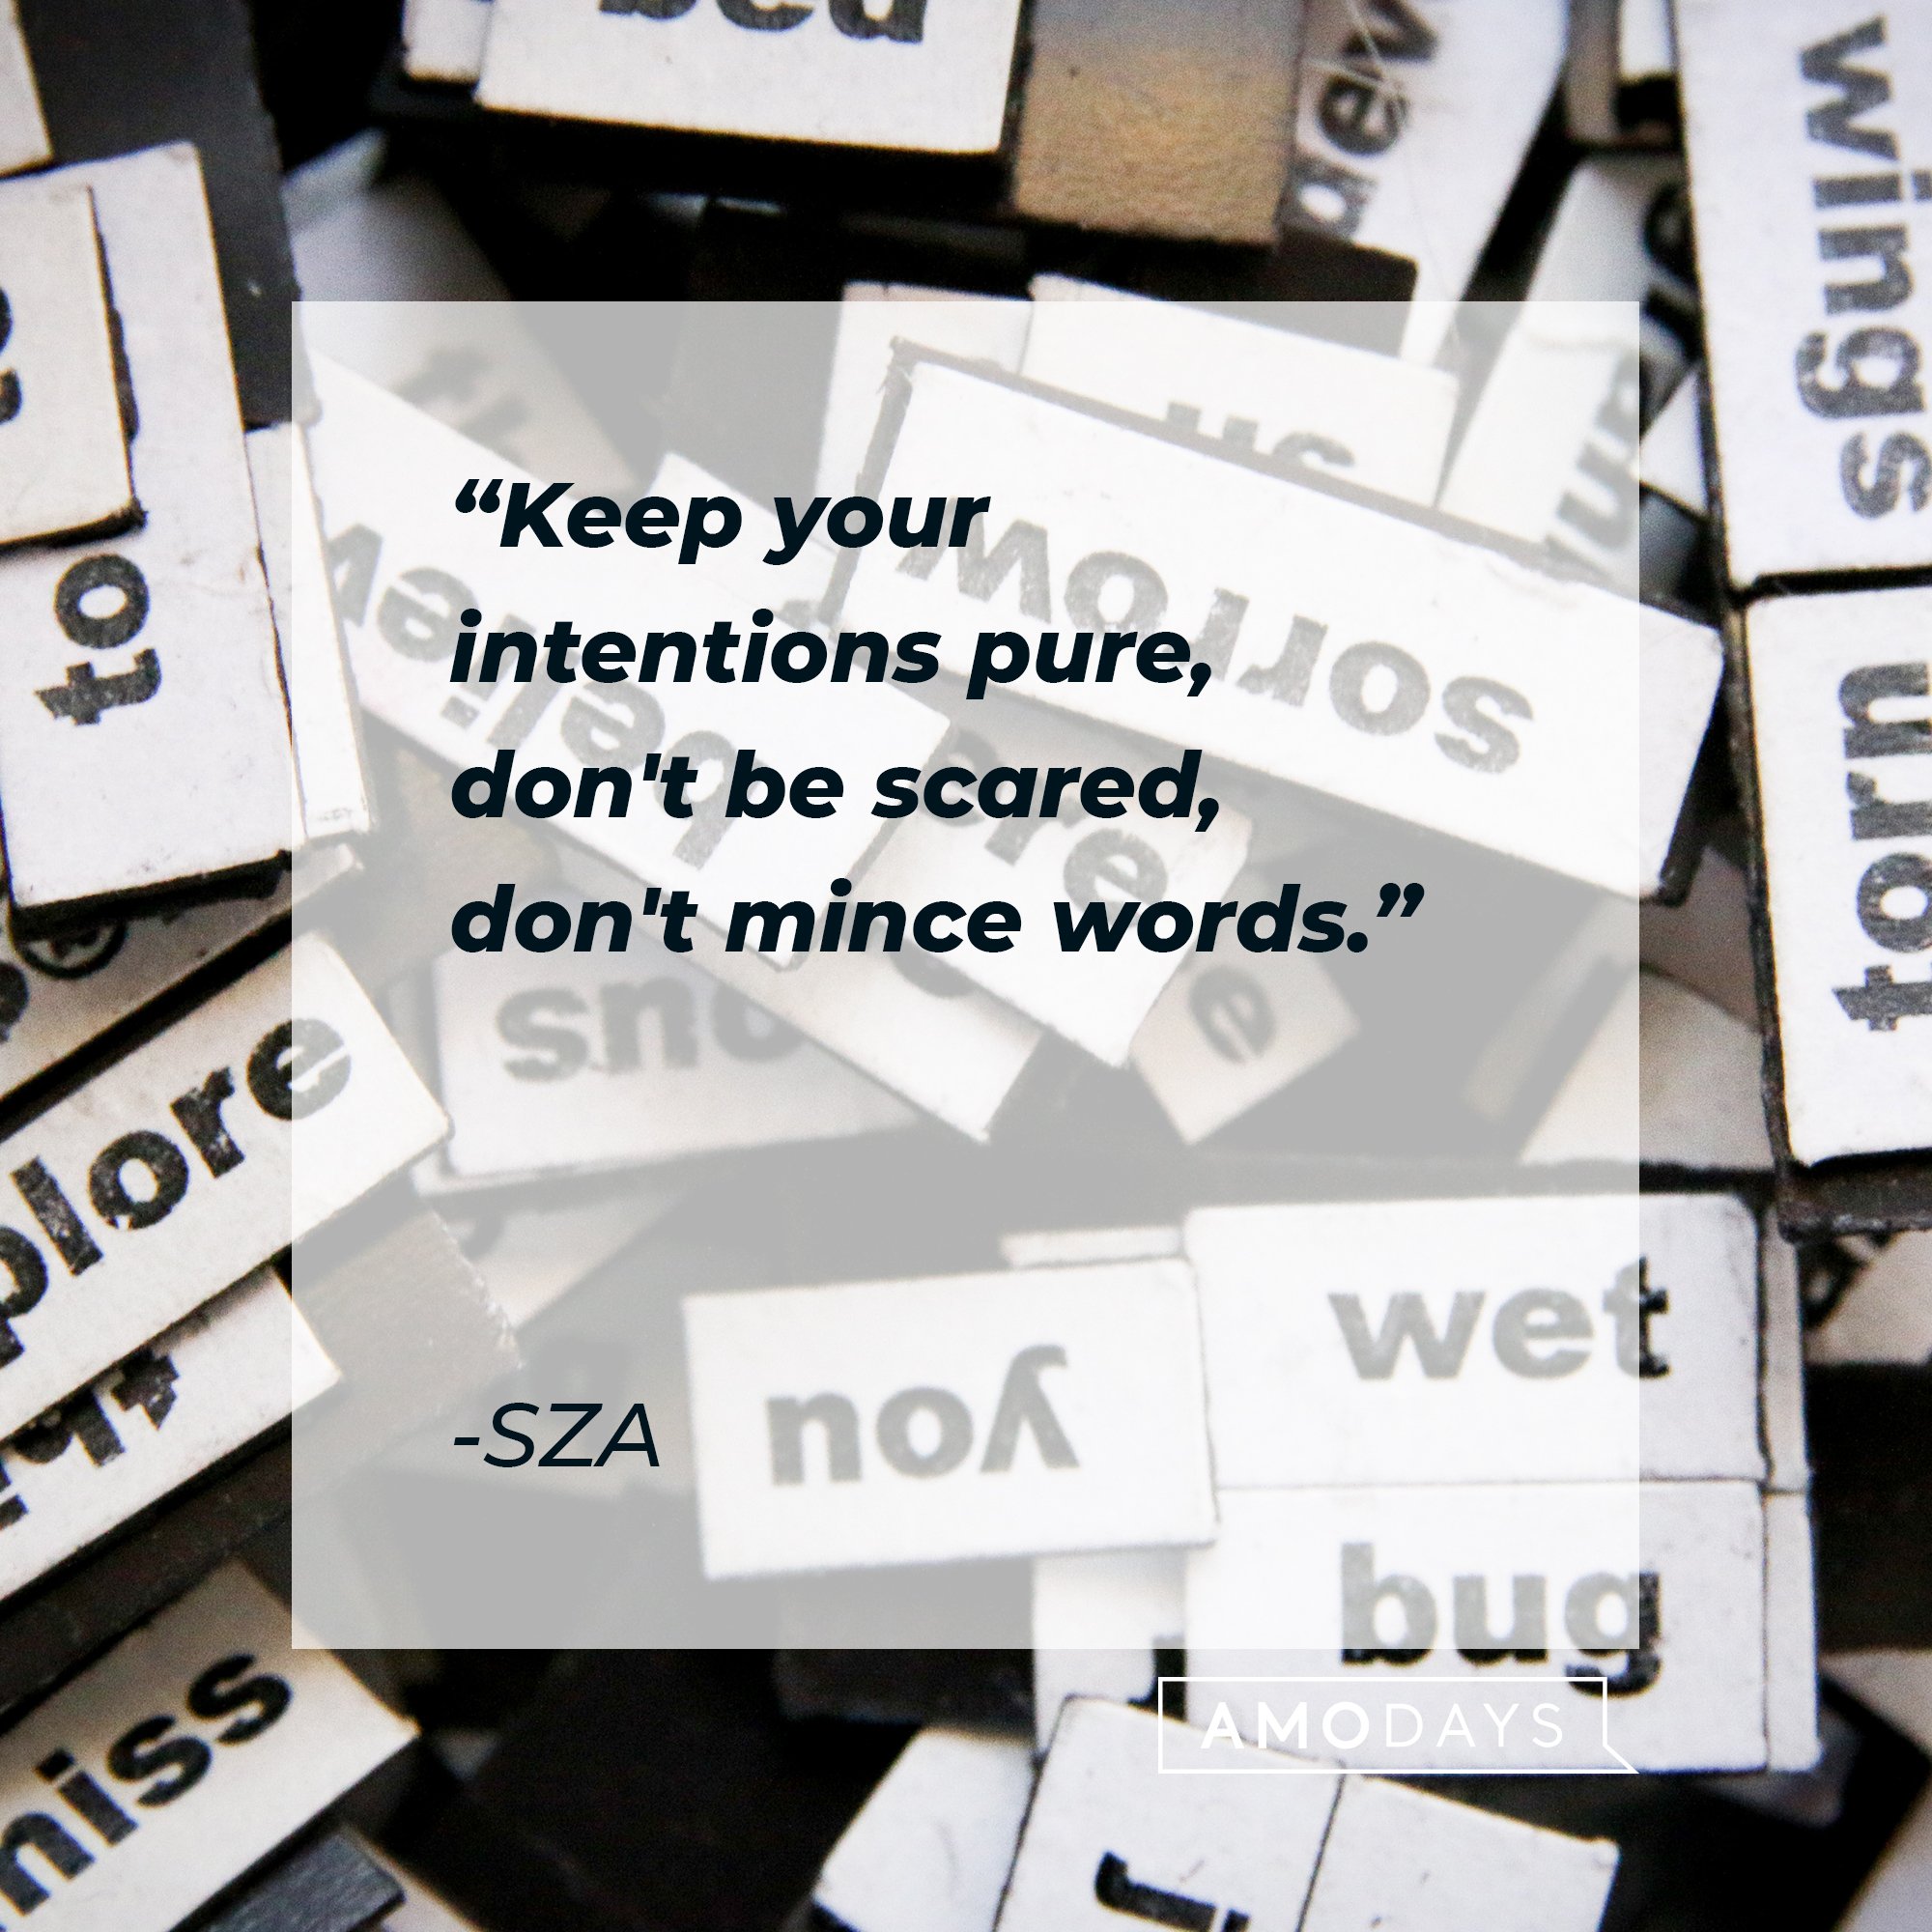 SZA’s quote: "Keep your intentions pure, don't be scared, don't mince words." | Image: AmoDays